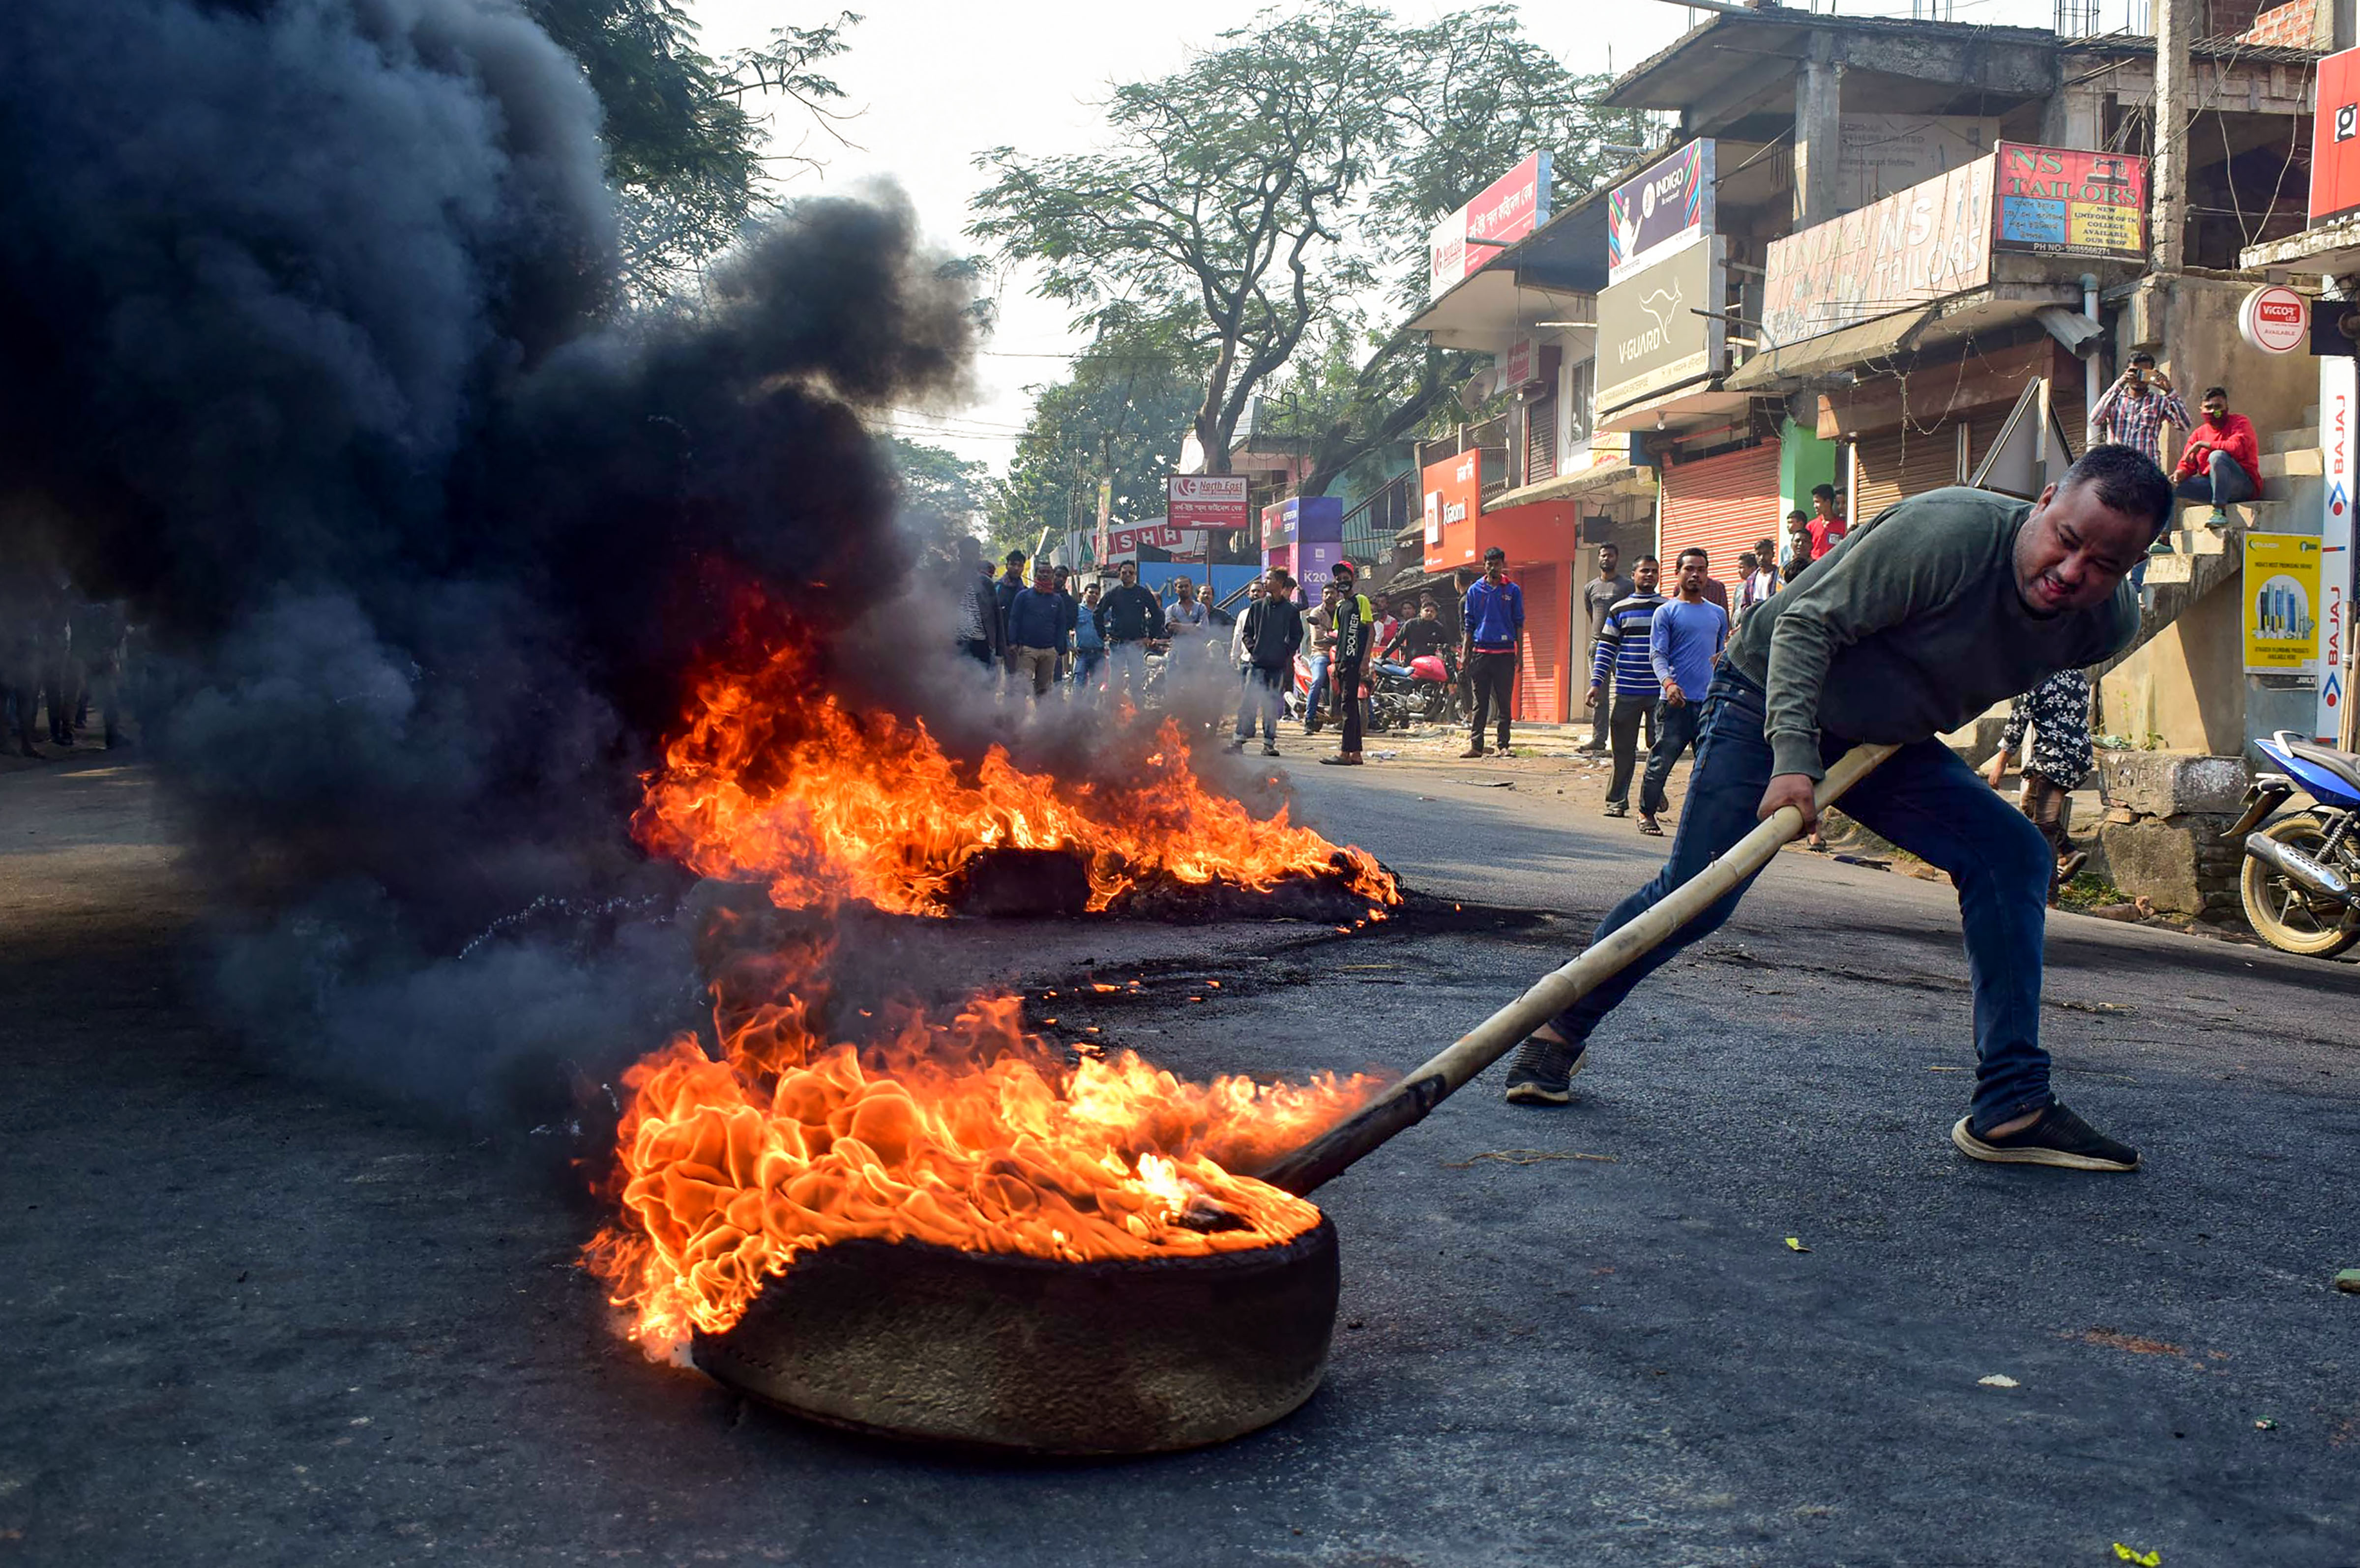 Road, rail blockade in Bengal as protests against Citizenship law continue